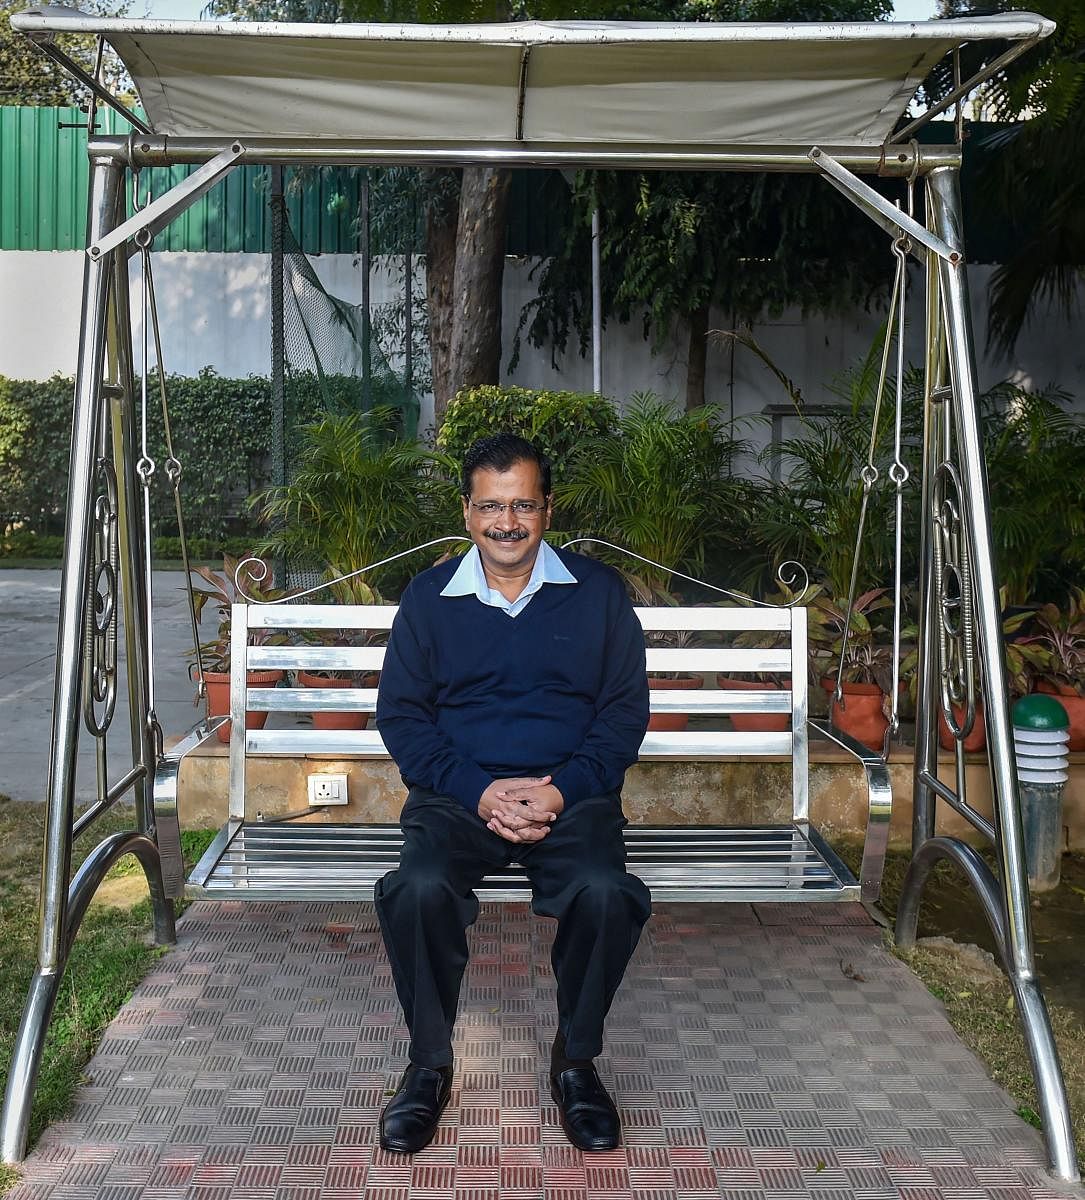 Delhi Election 2020 Highlights: Voter turnout at 61% till 5 pm; Exit polls predict AAP set for second term